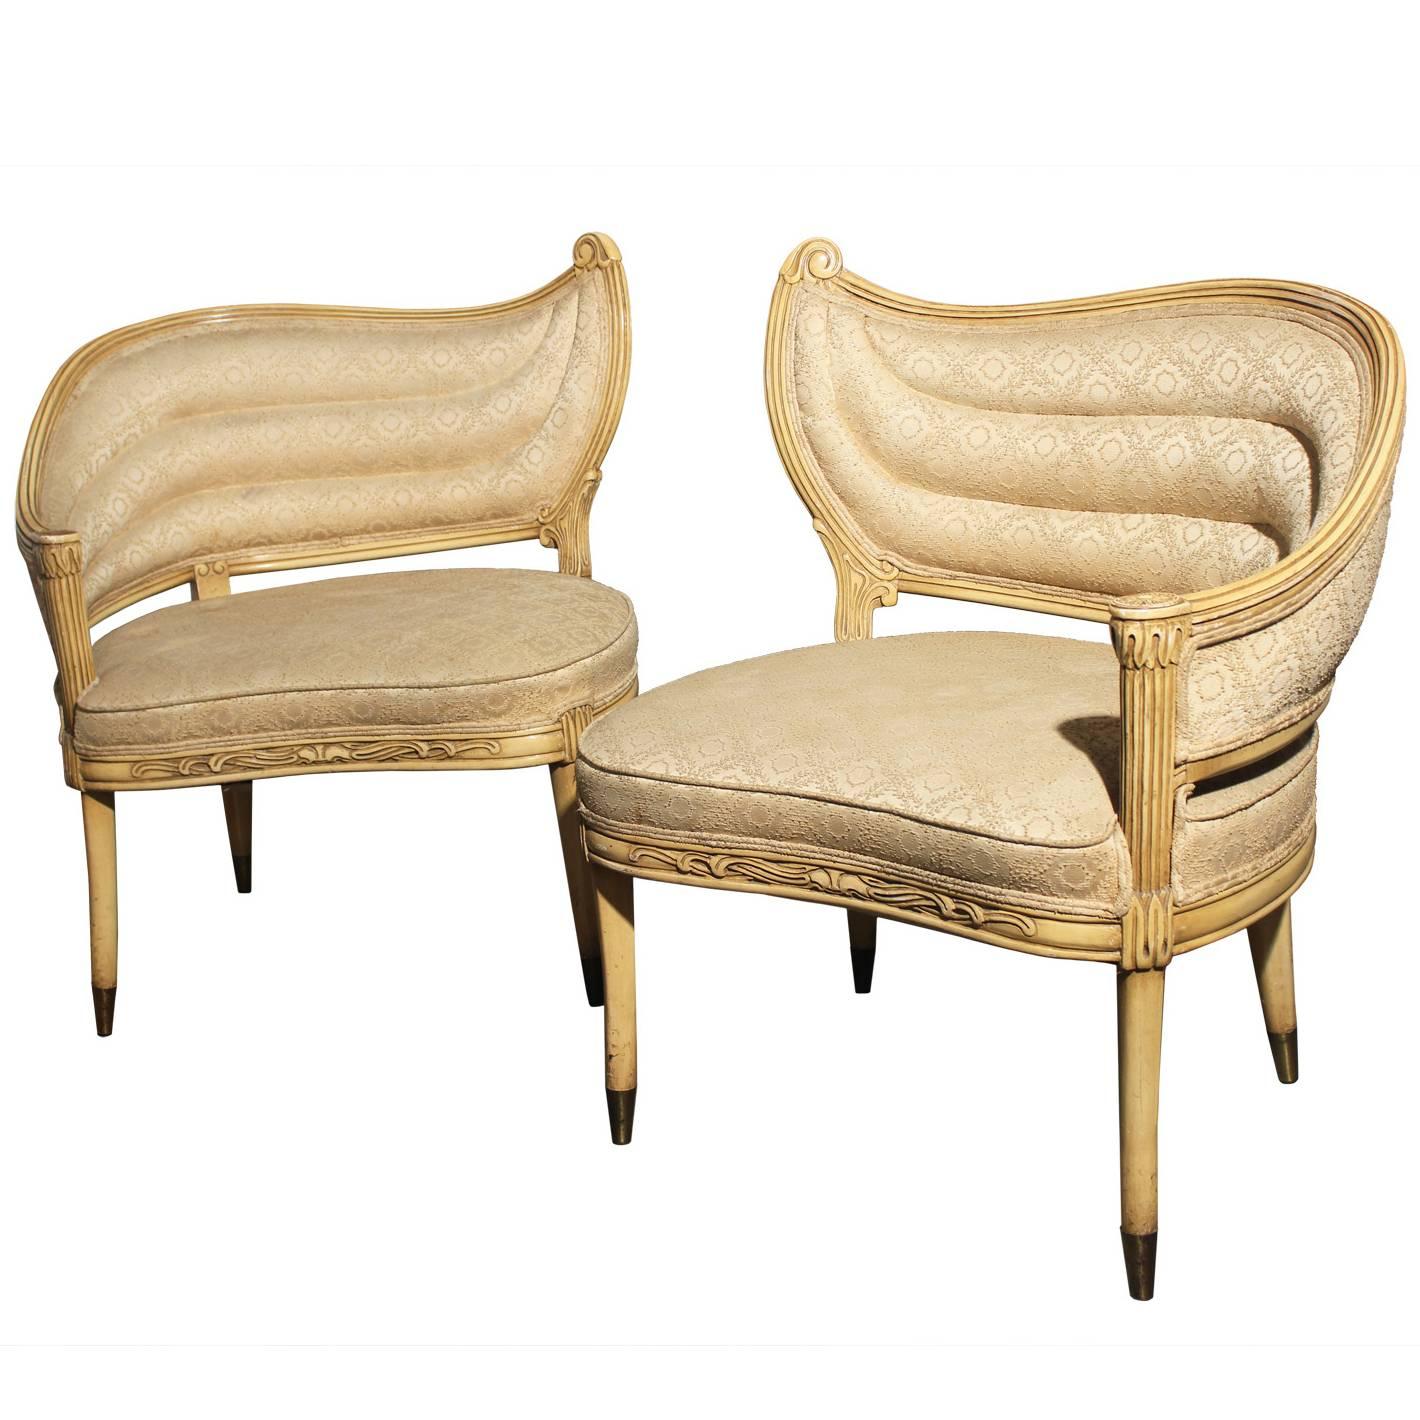 Vintage Hollywood Regency One-Armed Chairs by Prince Howard Furniture of KC, Mo